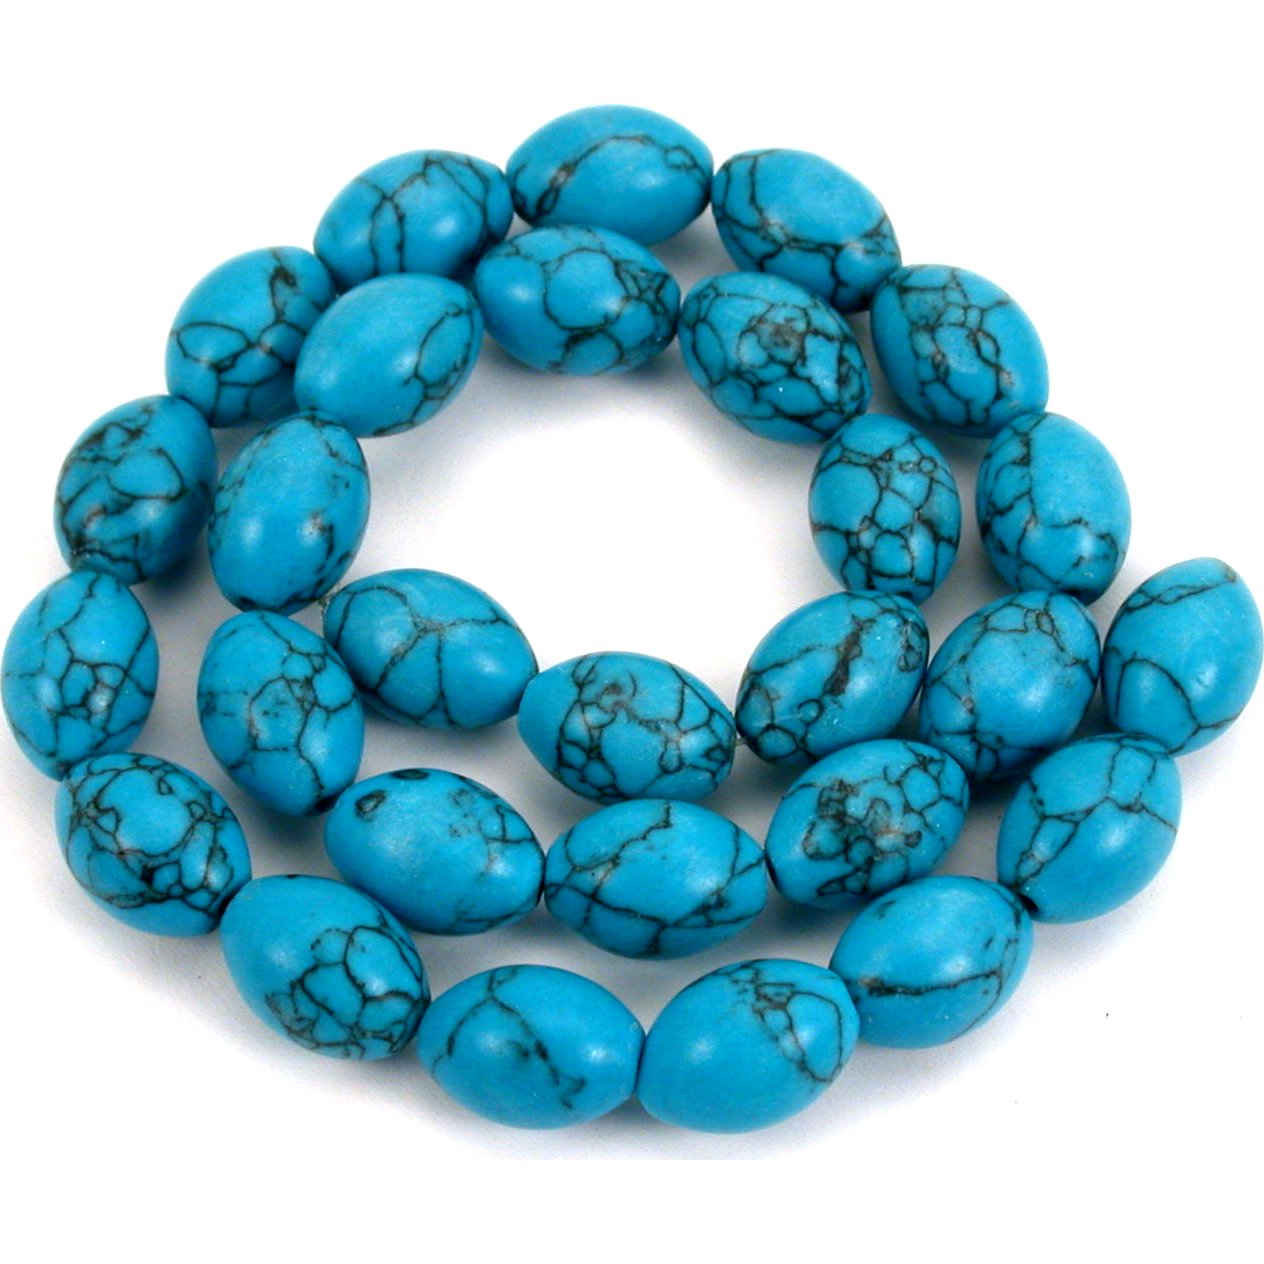 Turquoise Matrix Synthetic Rice Beads 14mm 1 Strand